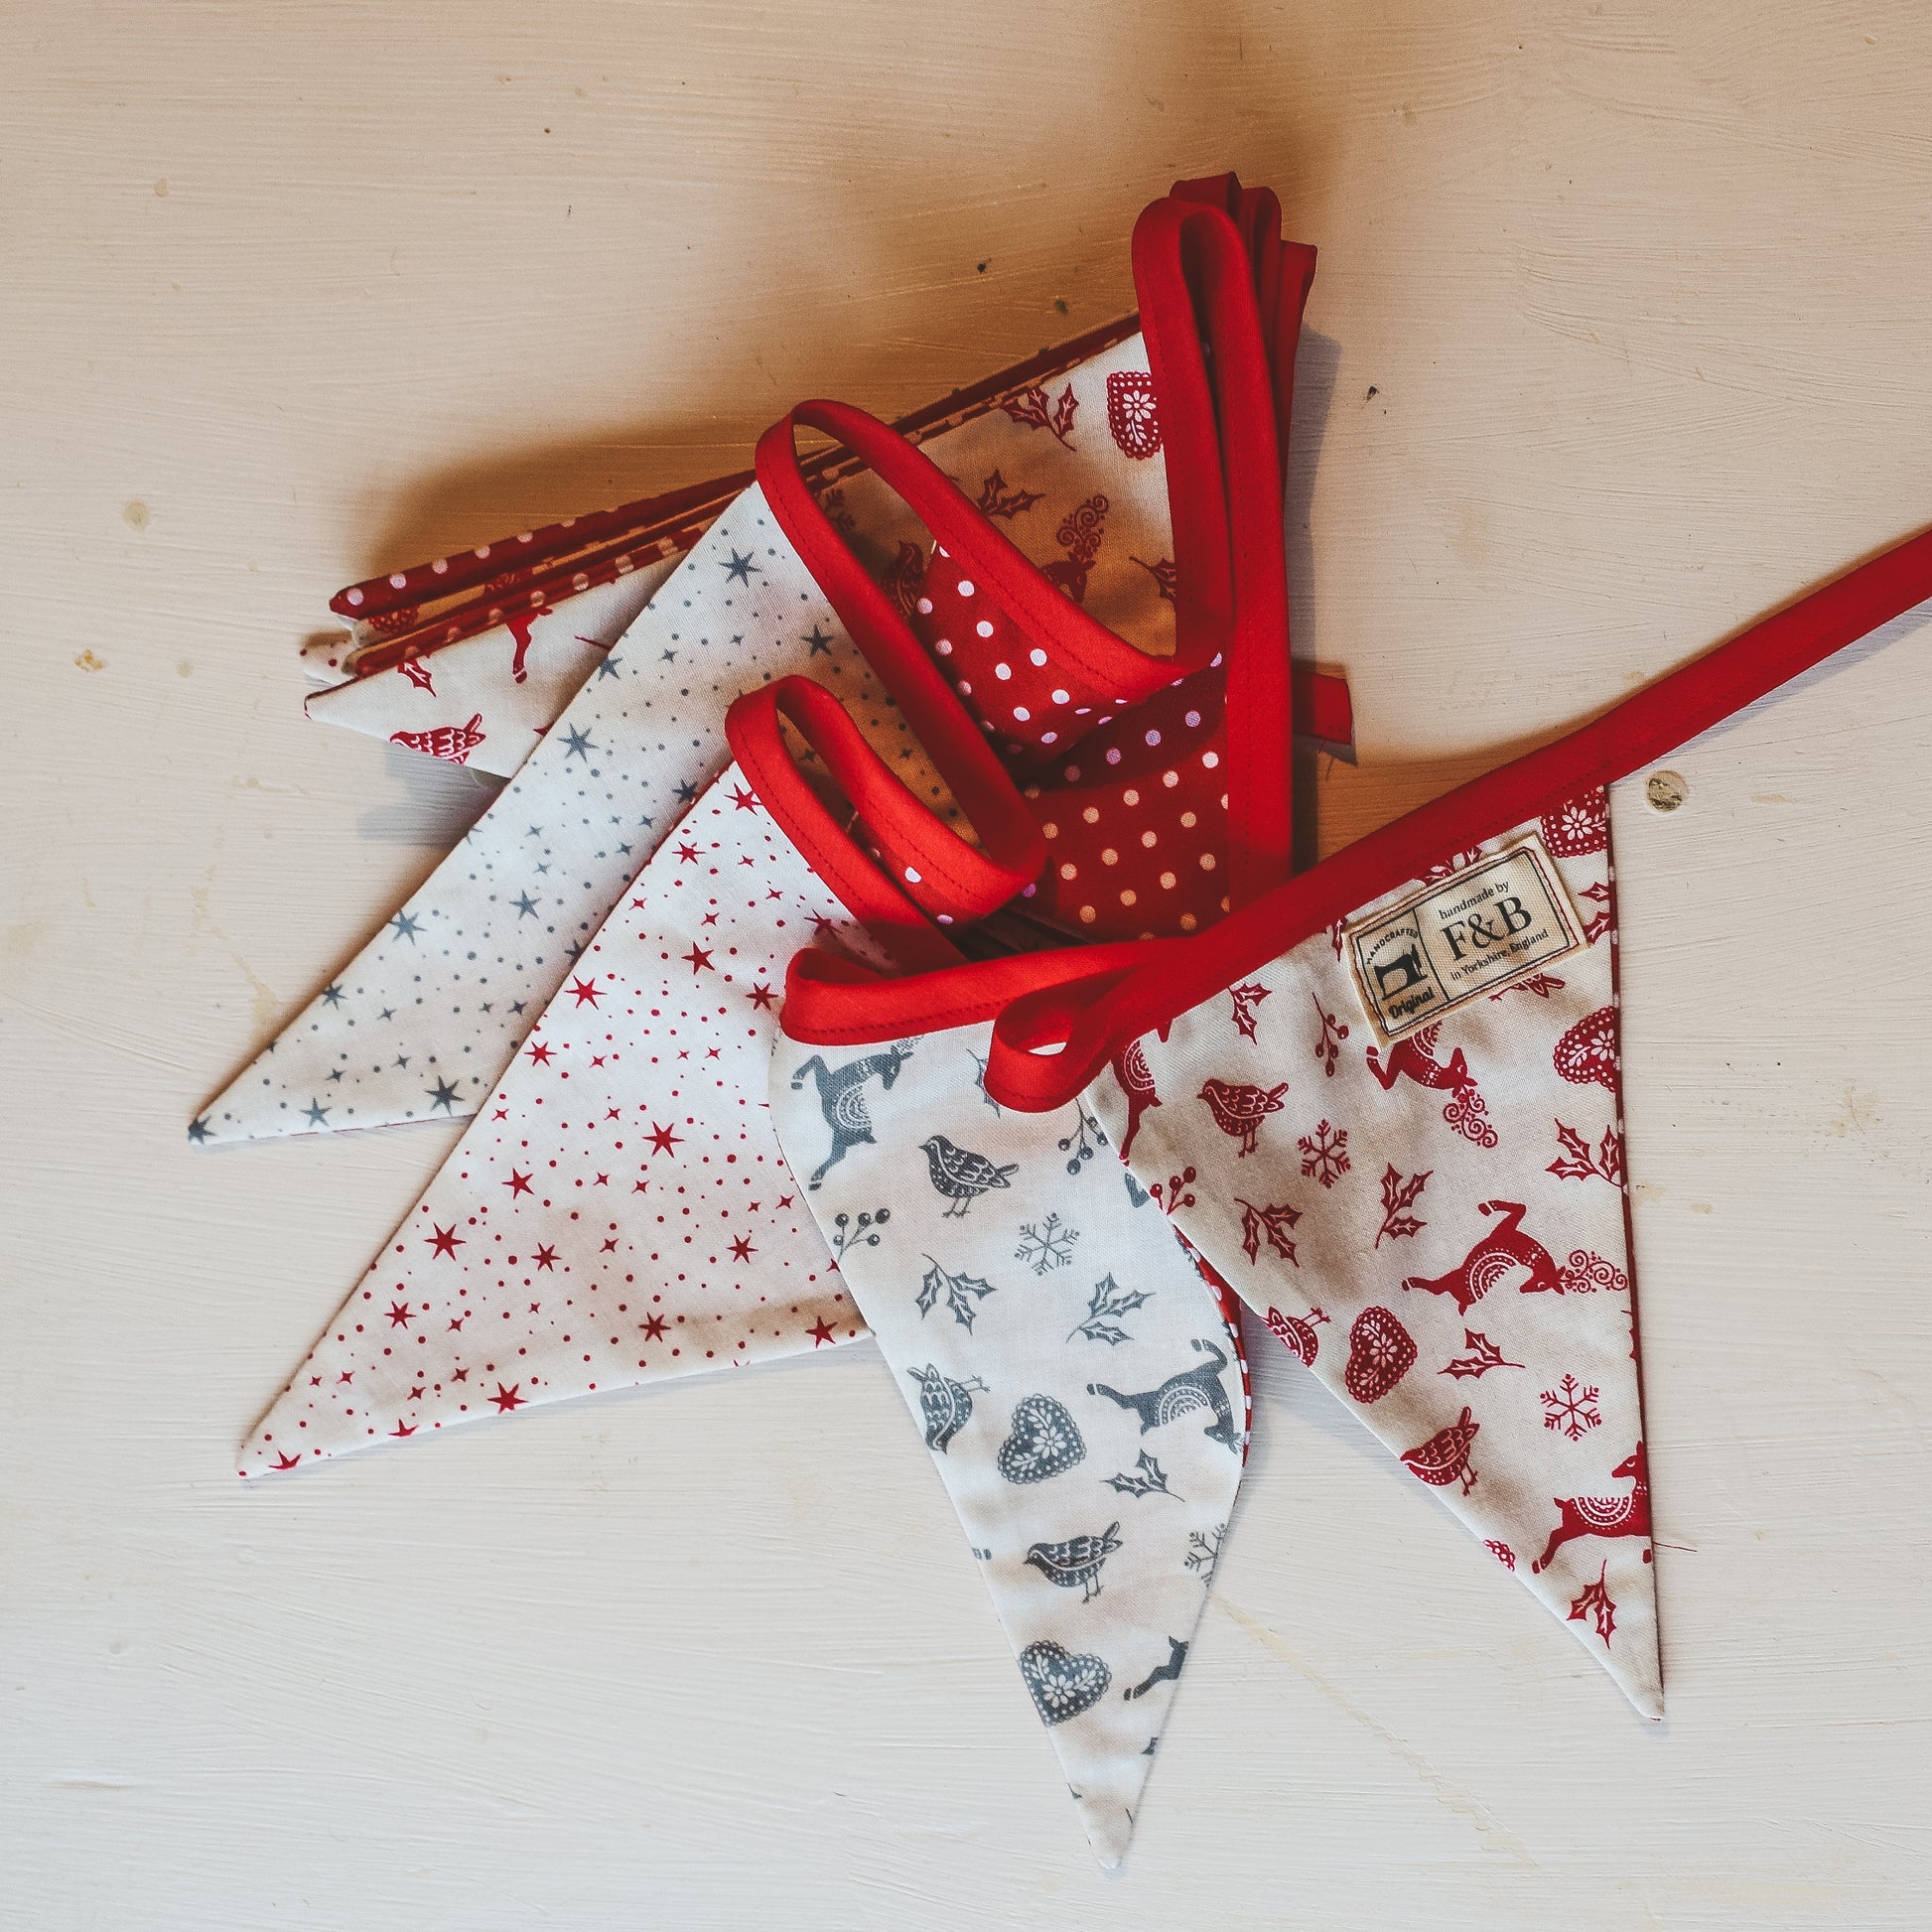 Handmade Scandi Style Bunting - Made by F&B in Yorkshire - A handmade Christmas